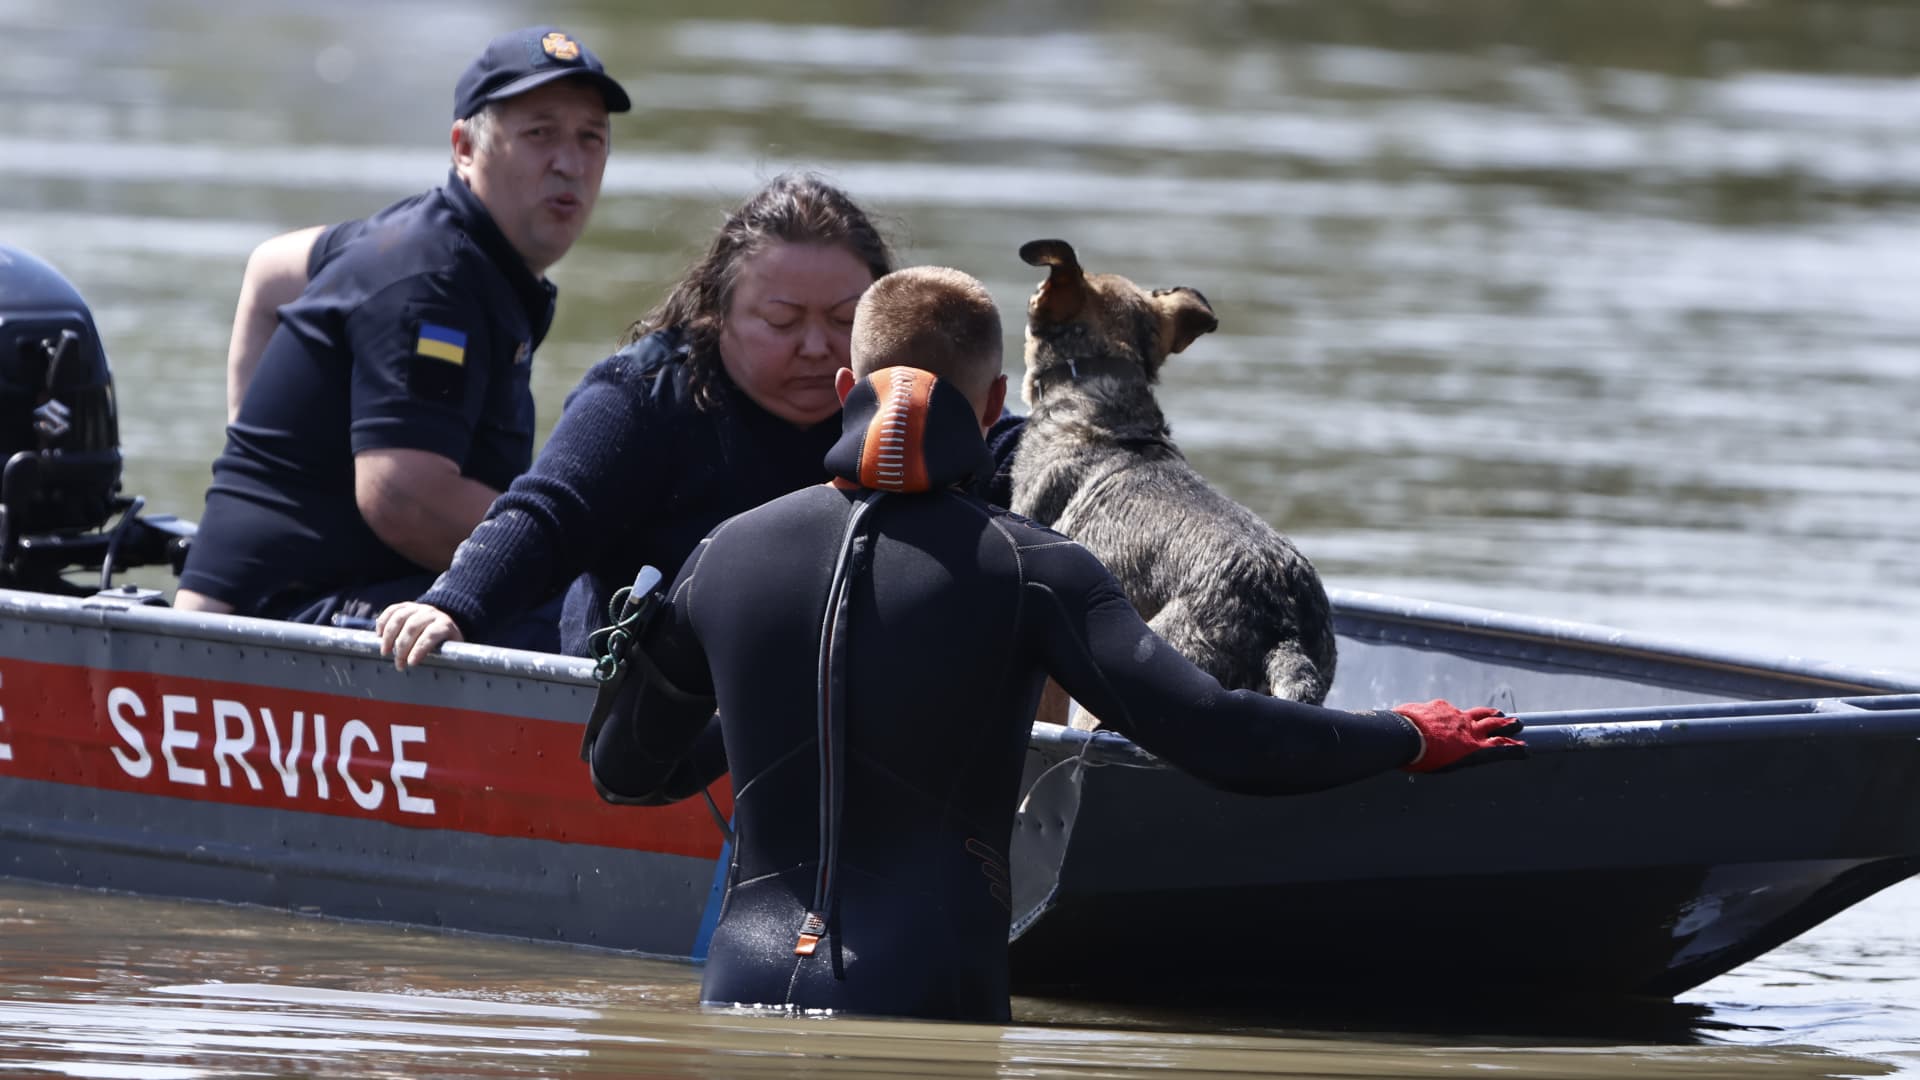 Rescuers evacuate a woman with her dog in the flooded area of the city of Kherson, Ukraine.